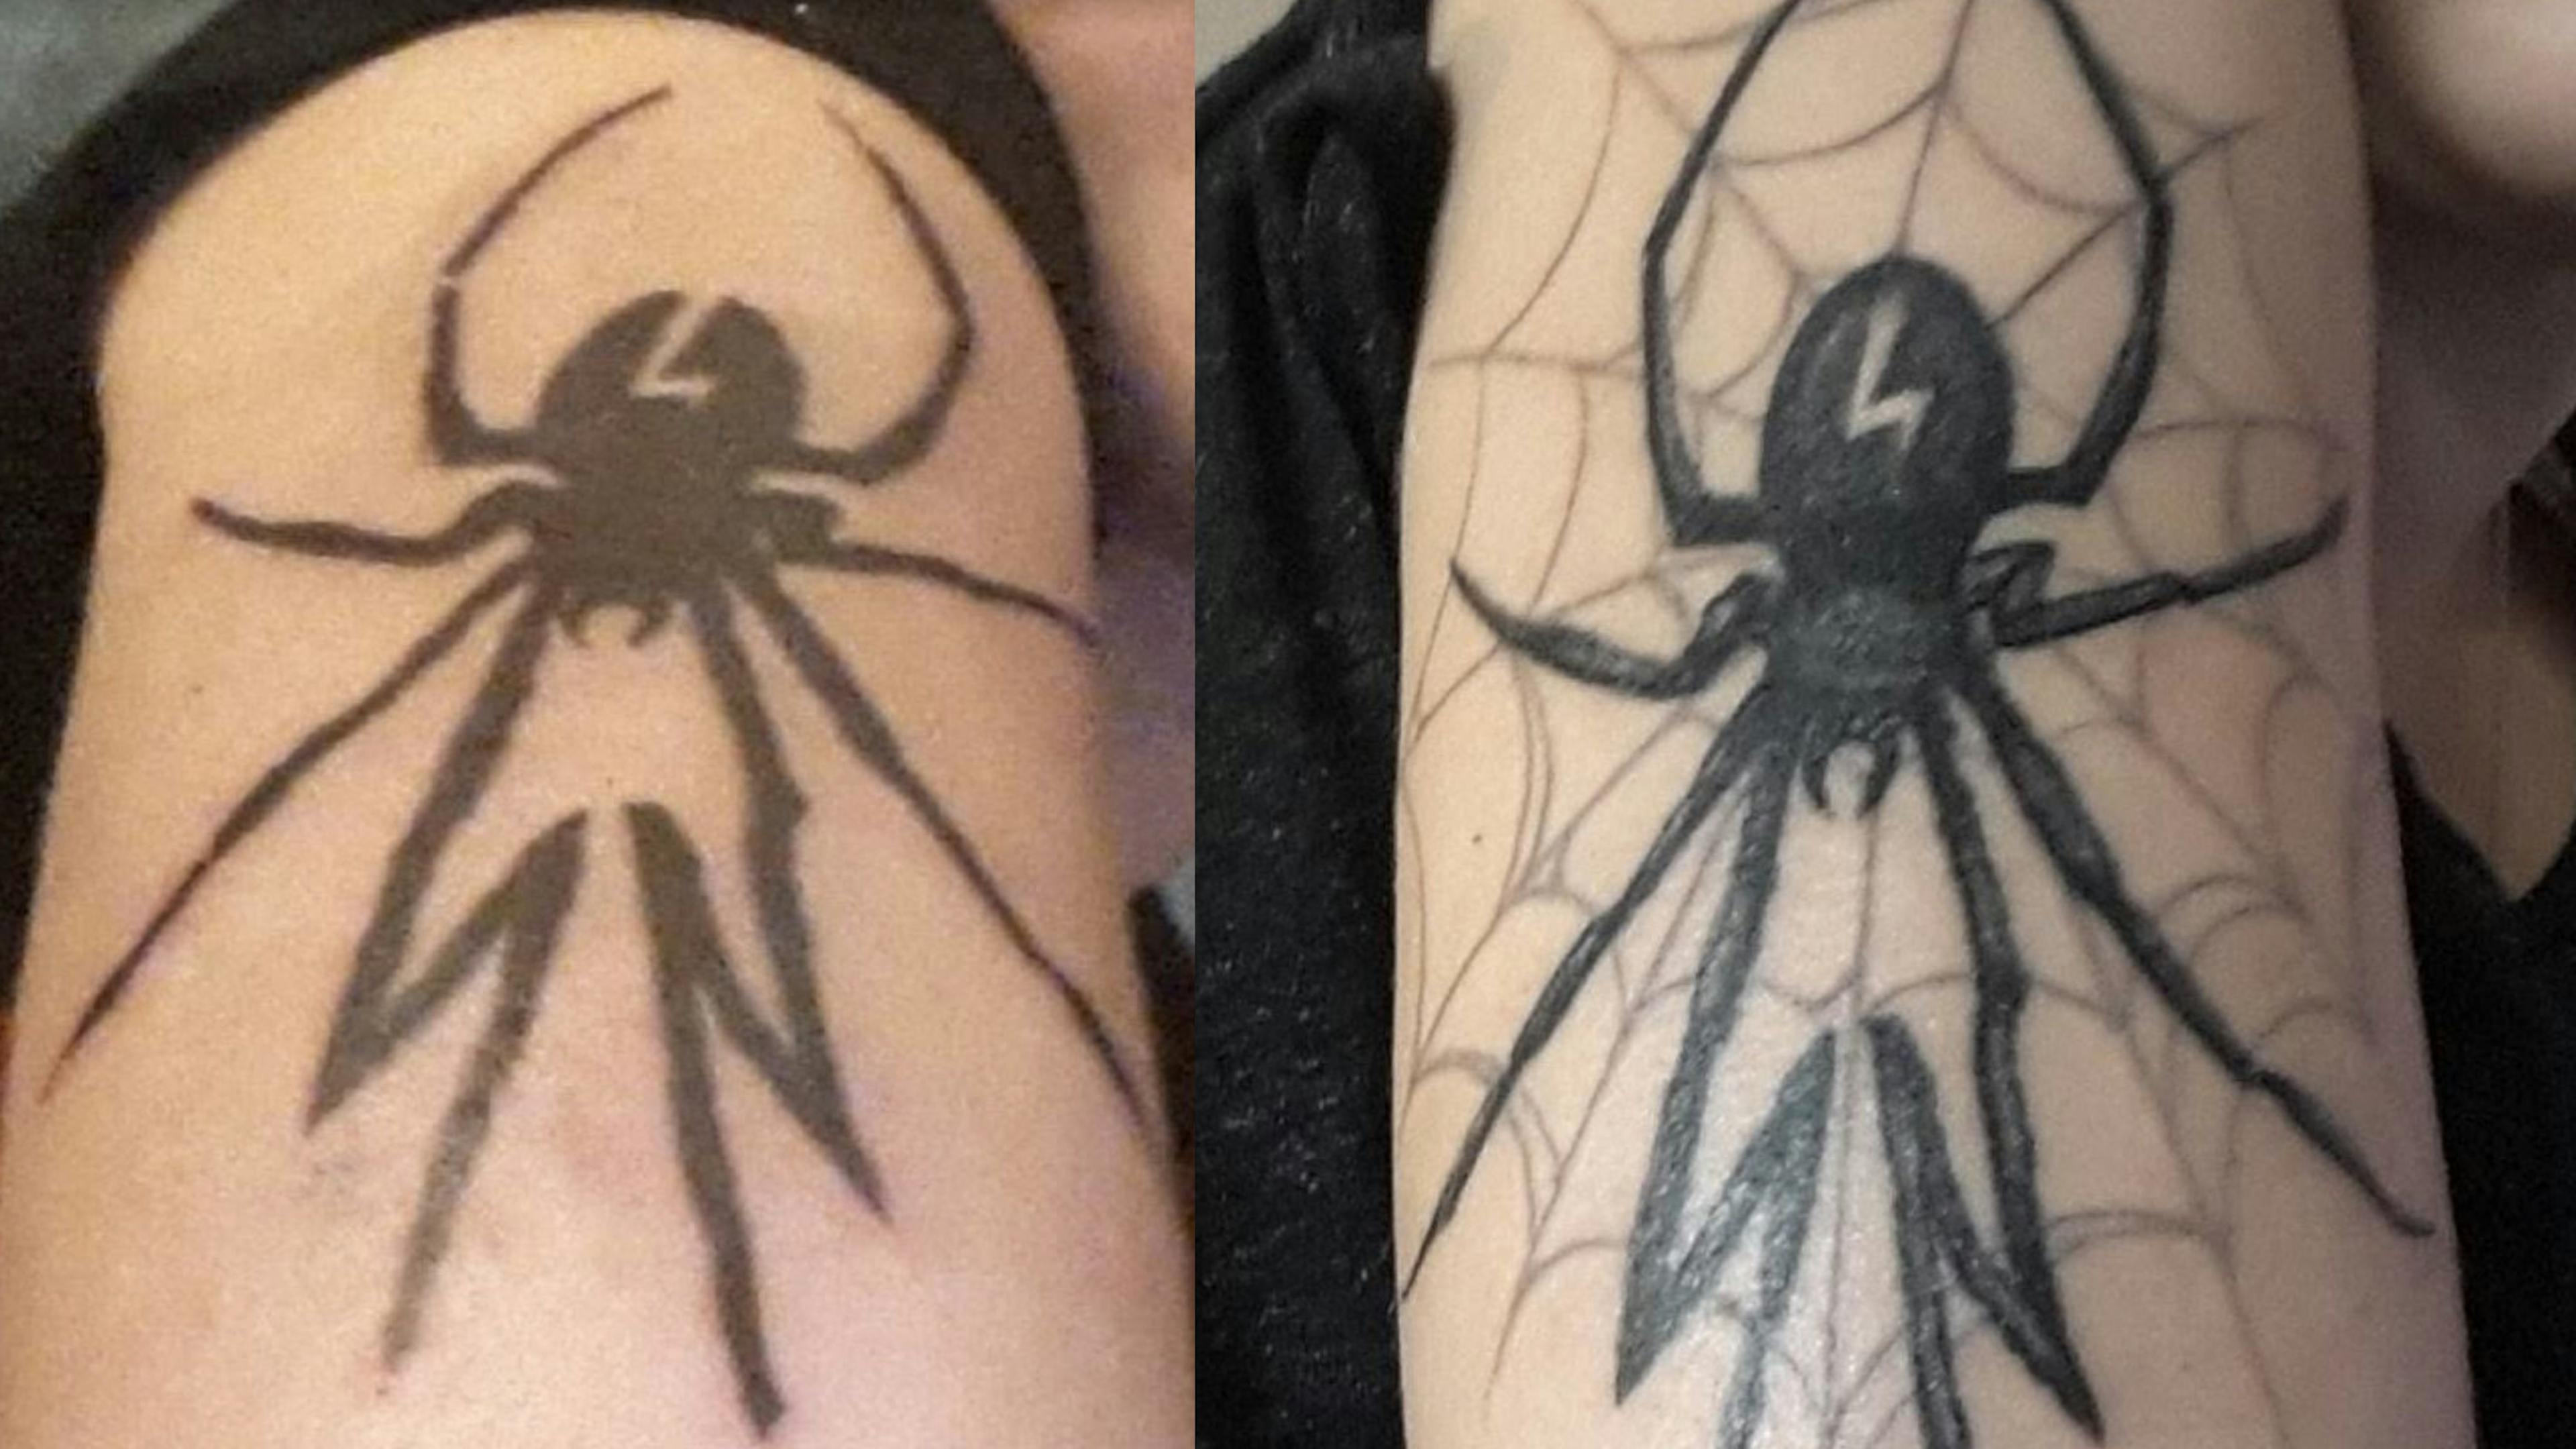 My complicated relationship with my My Chemical Romance tattoo